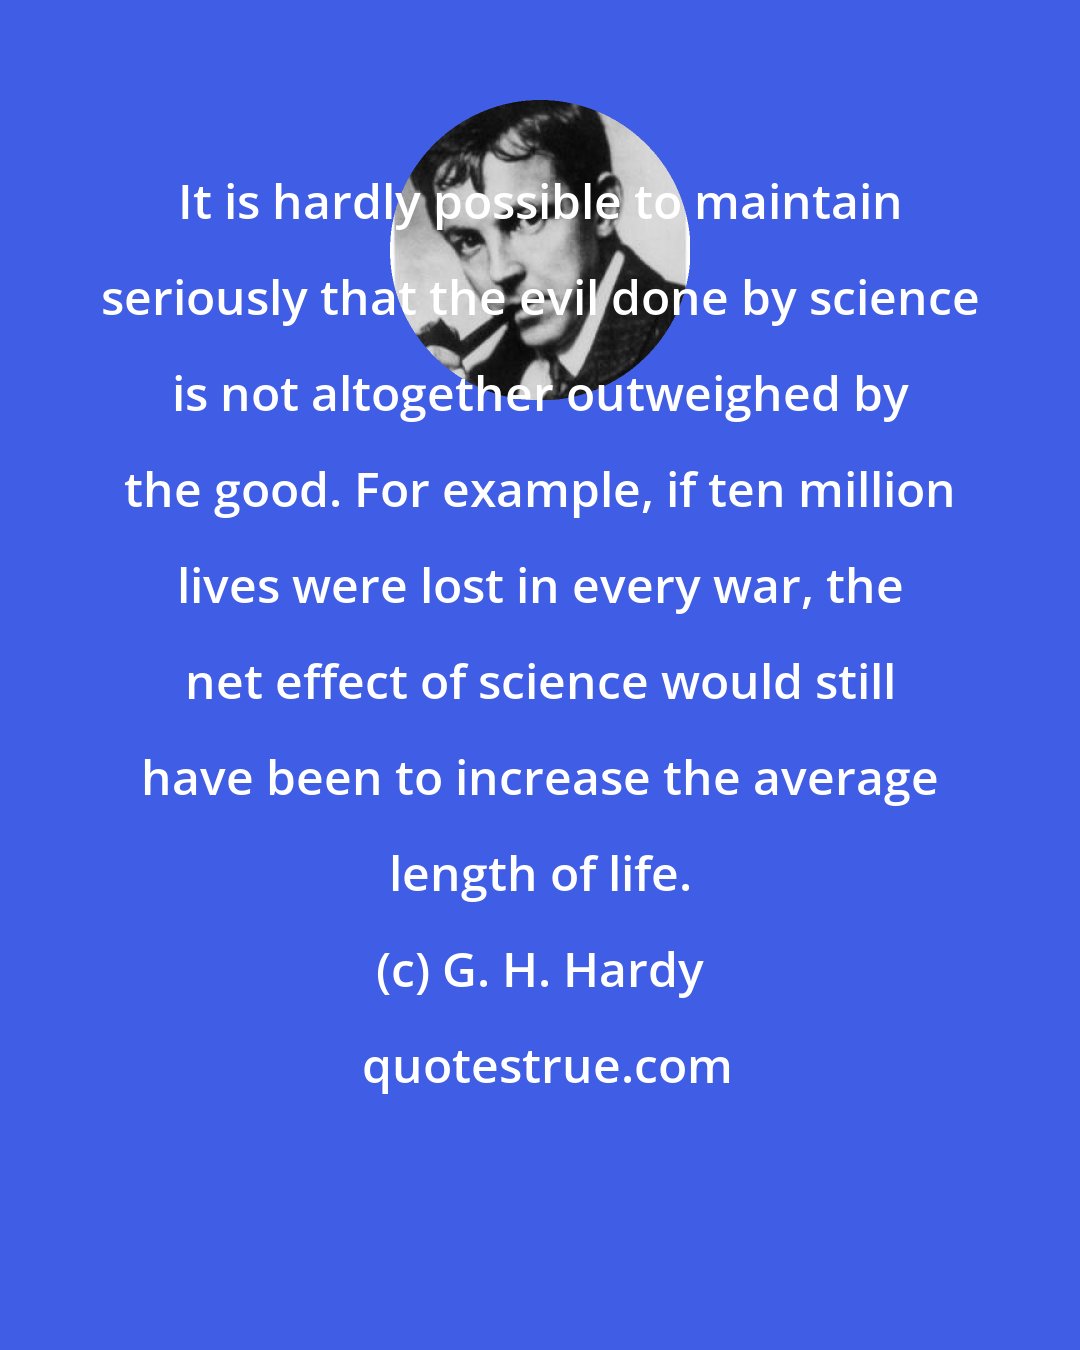 G. H. Hardy: It is hardly possible to maintain seriously that the evil done by science is not altogether outweighed by the good. For example, if ten million lives were lost in every war, the net effect of science would still have been to increase the average length of life.